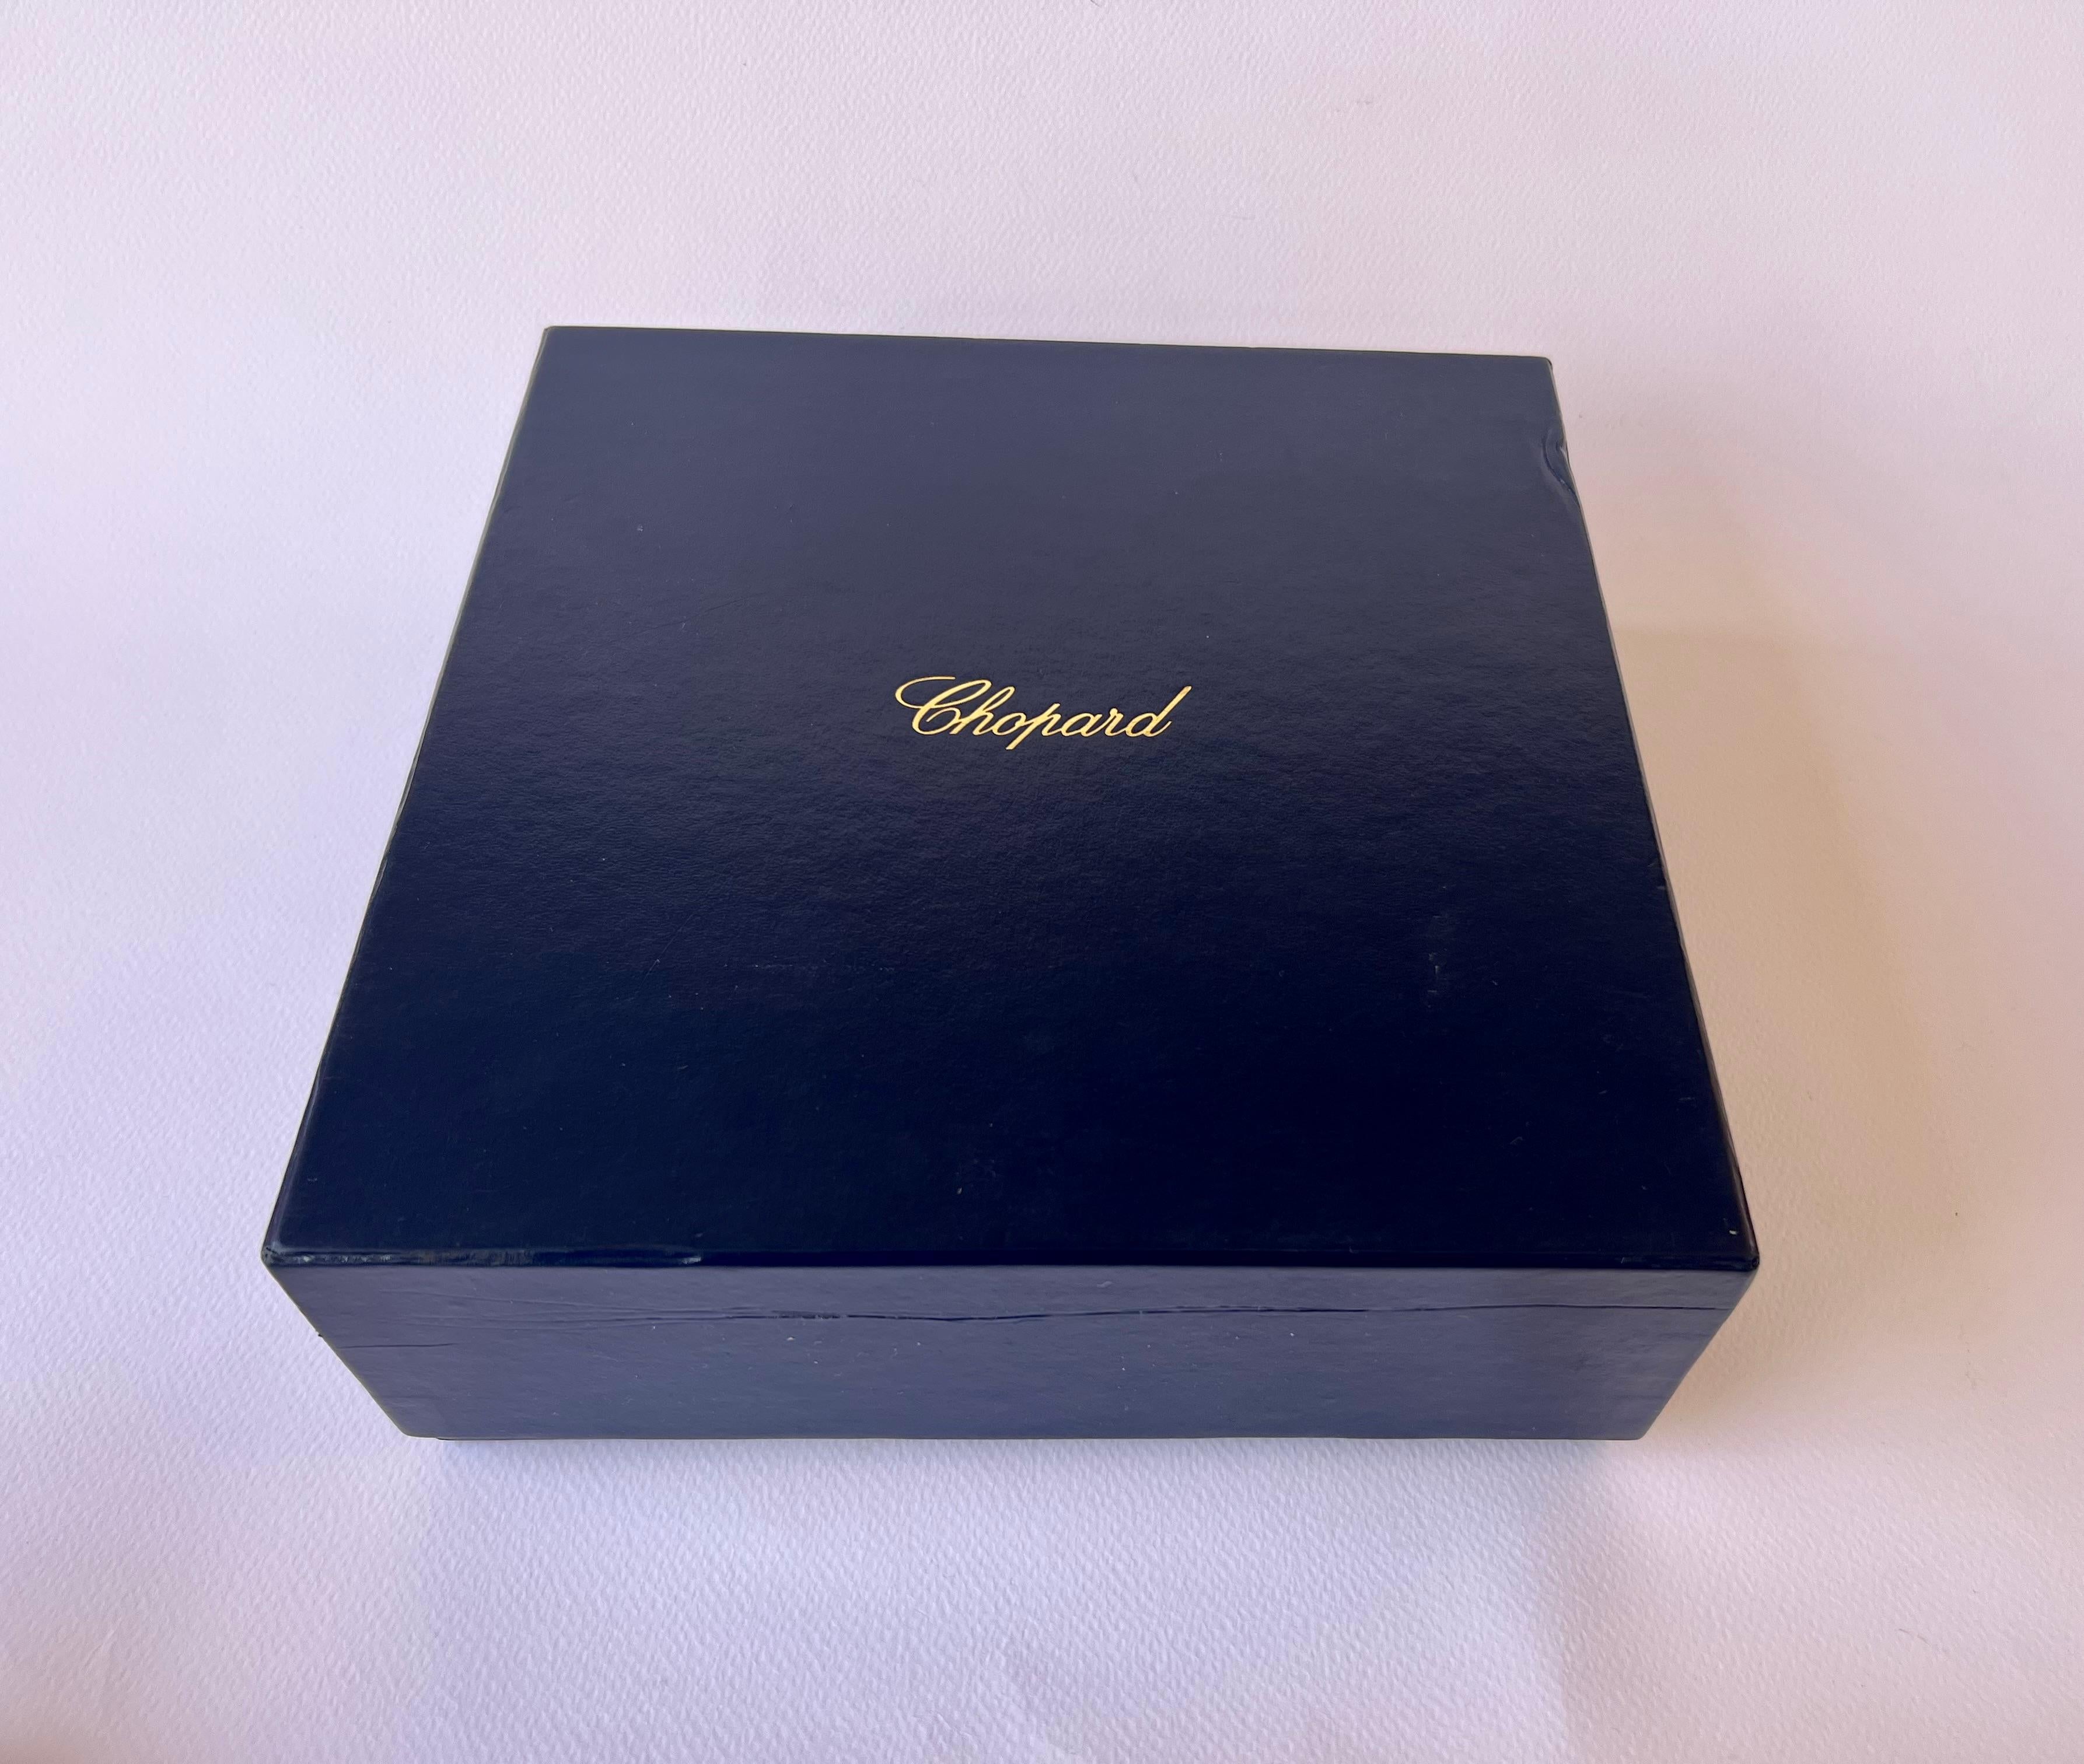 For your consideration a very nice Chopard Sterling Silver Luxury Set . This is a authentic pen, details in the photos speak for themselves.

PRODUCT DESCRIPTION

Brand Name : Chopard

Pen Details:

146 mm Length - 17 width mm (thick pen)

Writing